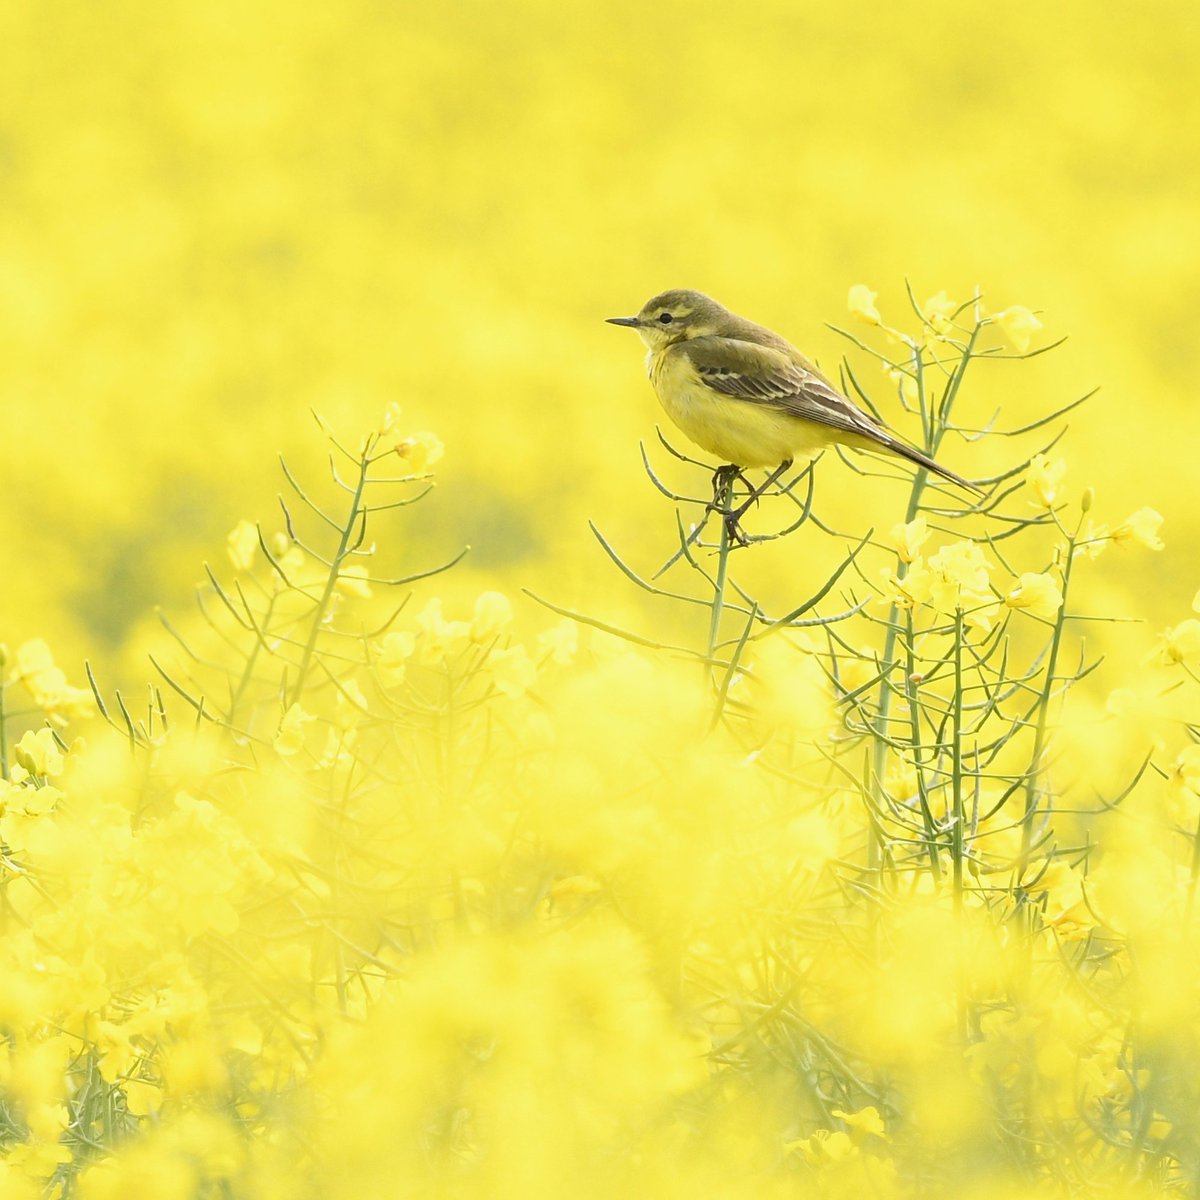 Spotted another #YellowWagtail today, this time in a field of #rapeseed. 

#TwitterNatureCommunity #birdphotography #nature #birds #BirdsofTwitter #birdtwitter #WagtailFamily #yellow